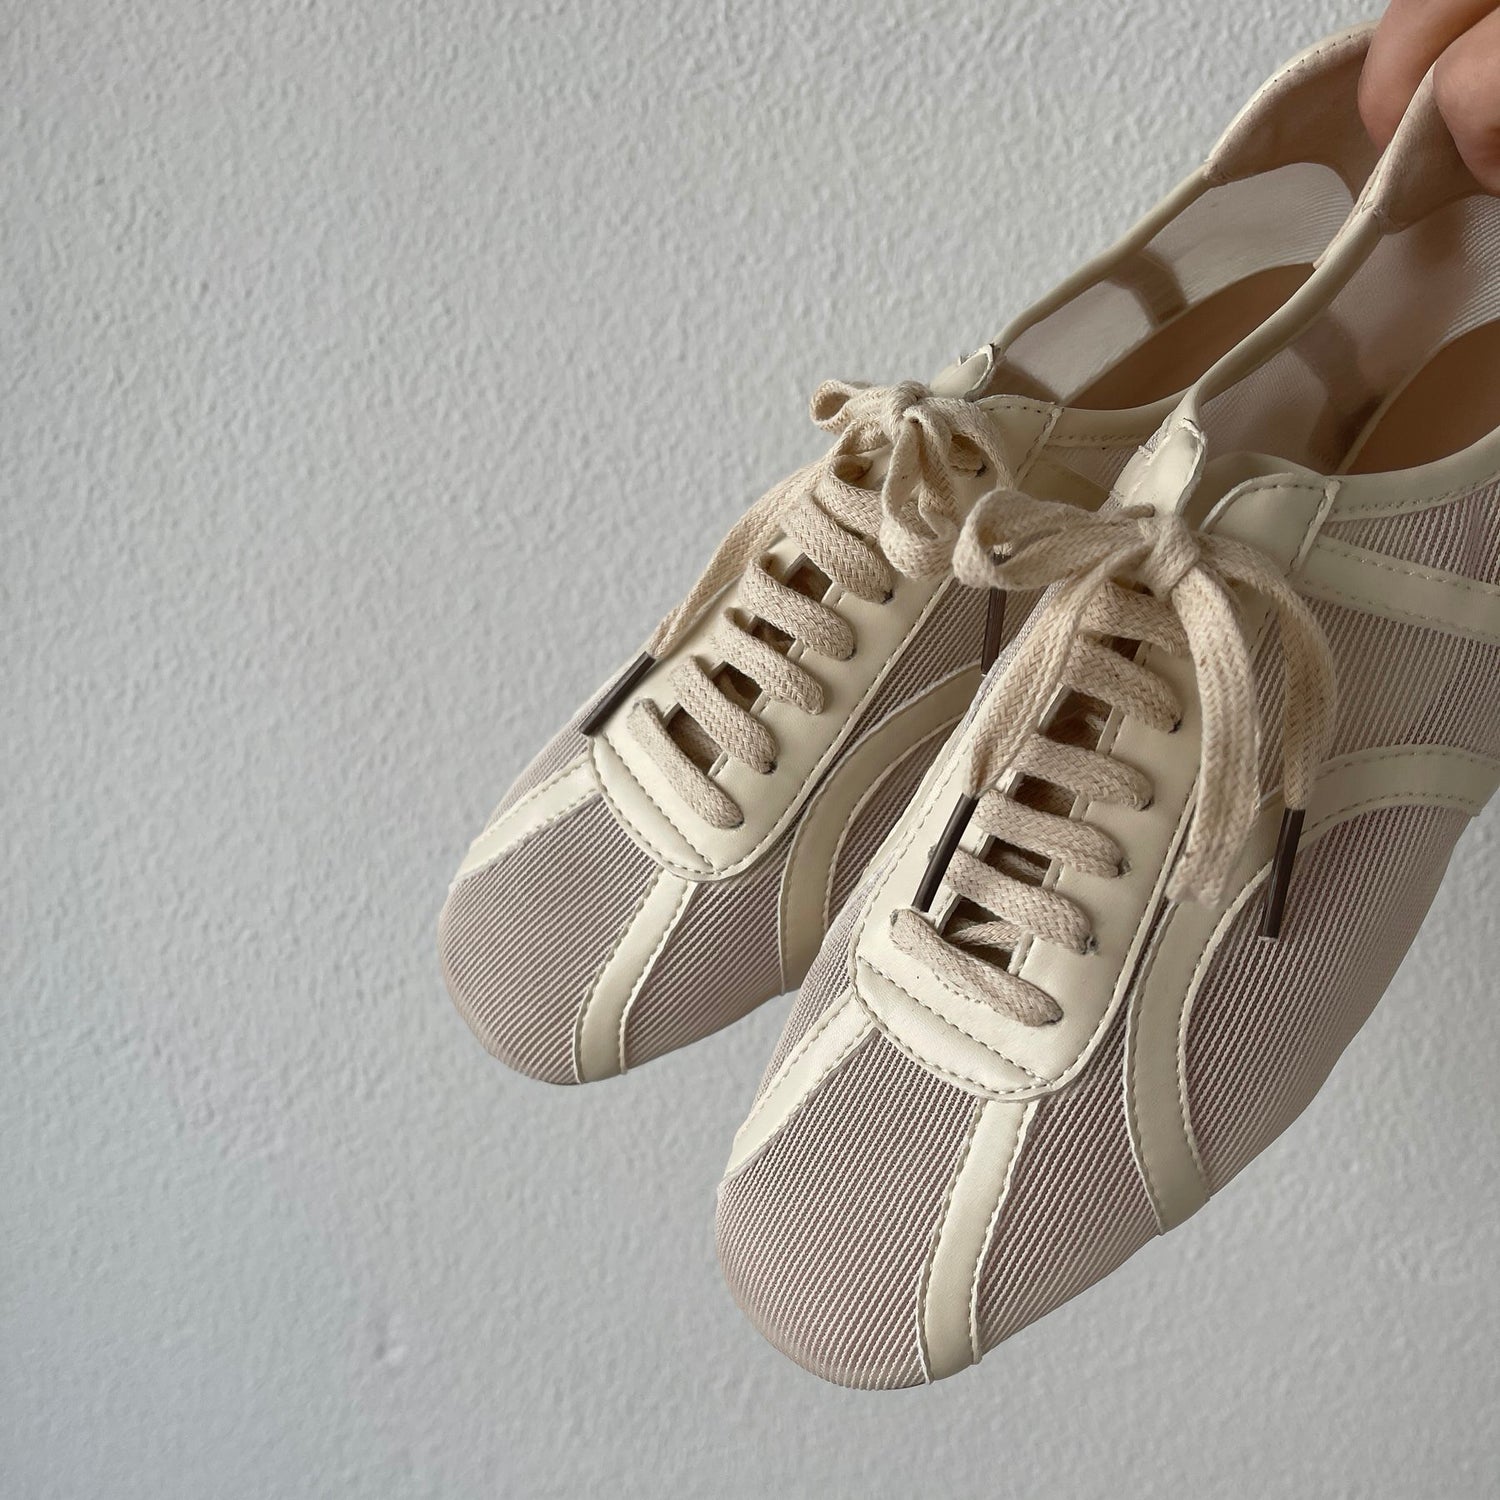 see through mesh shoes / beige